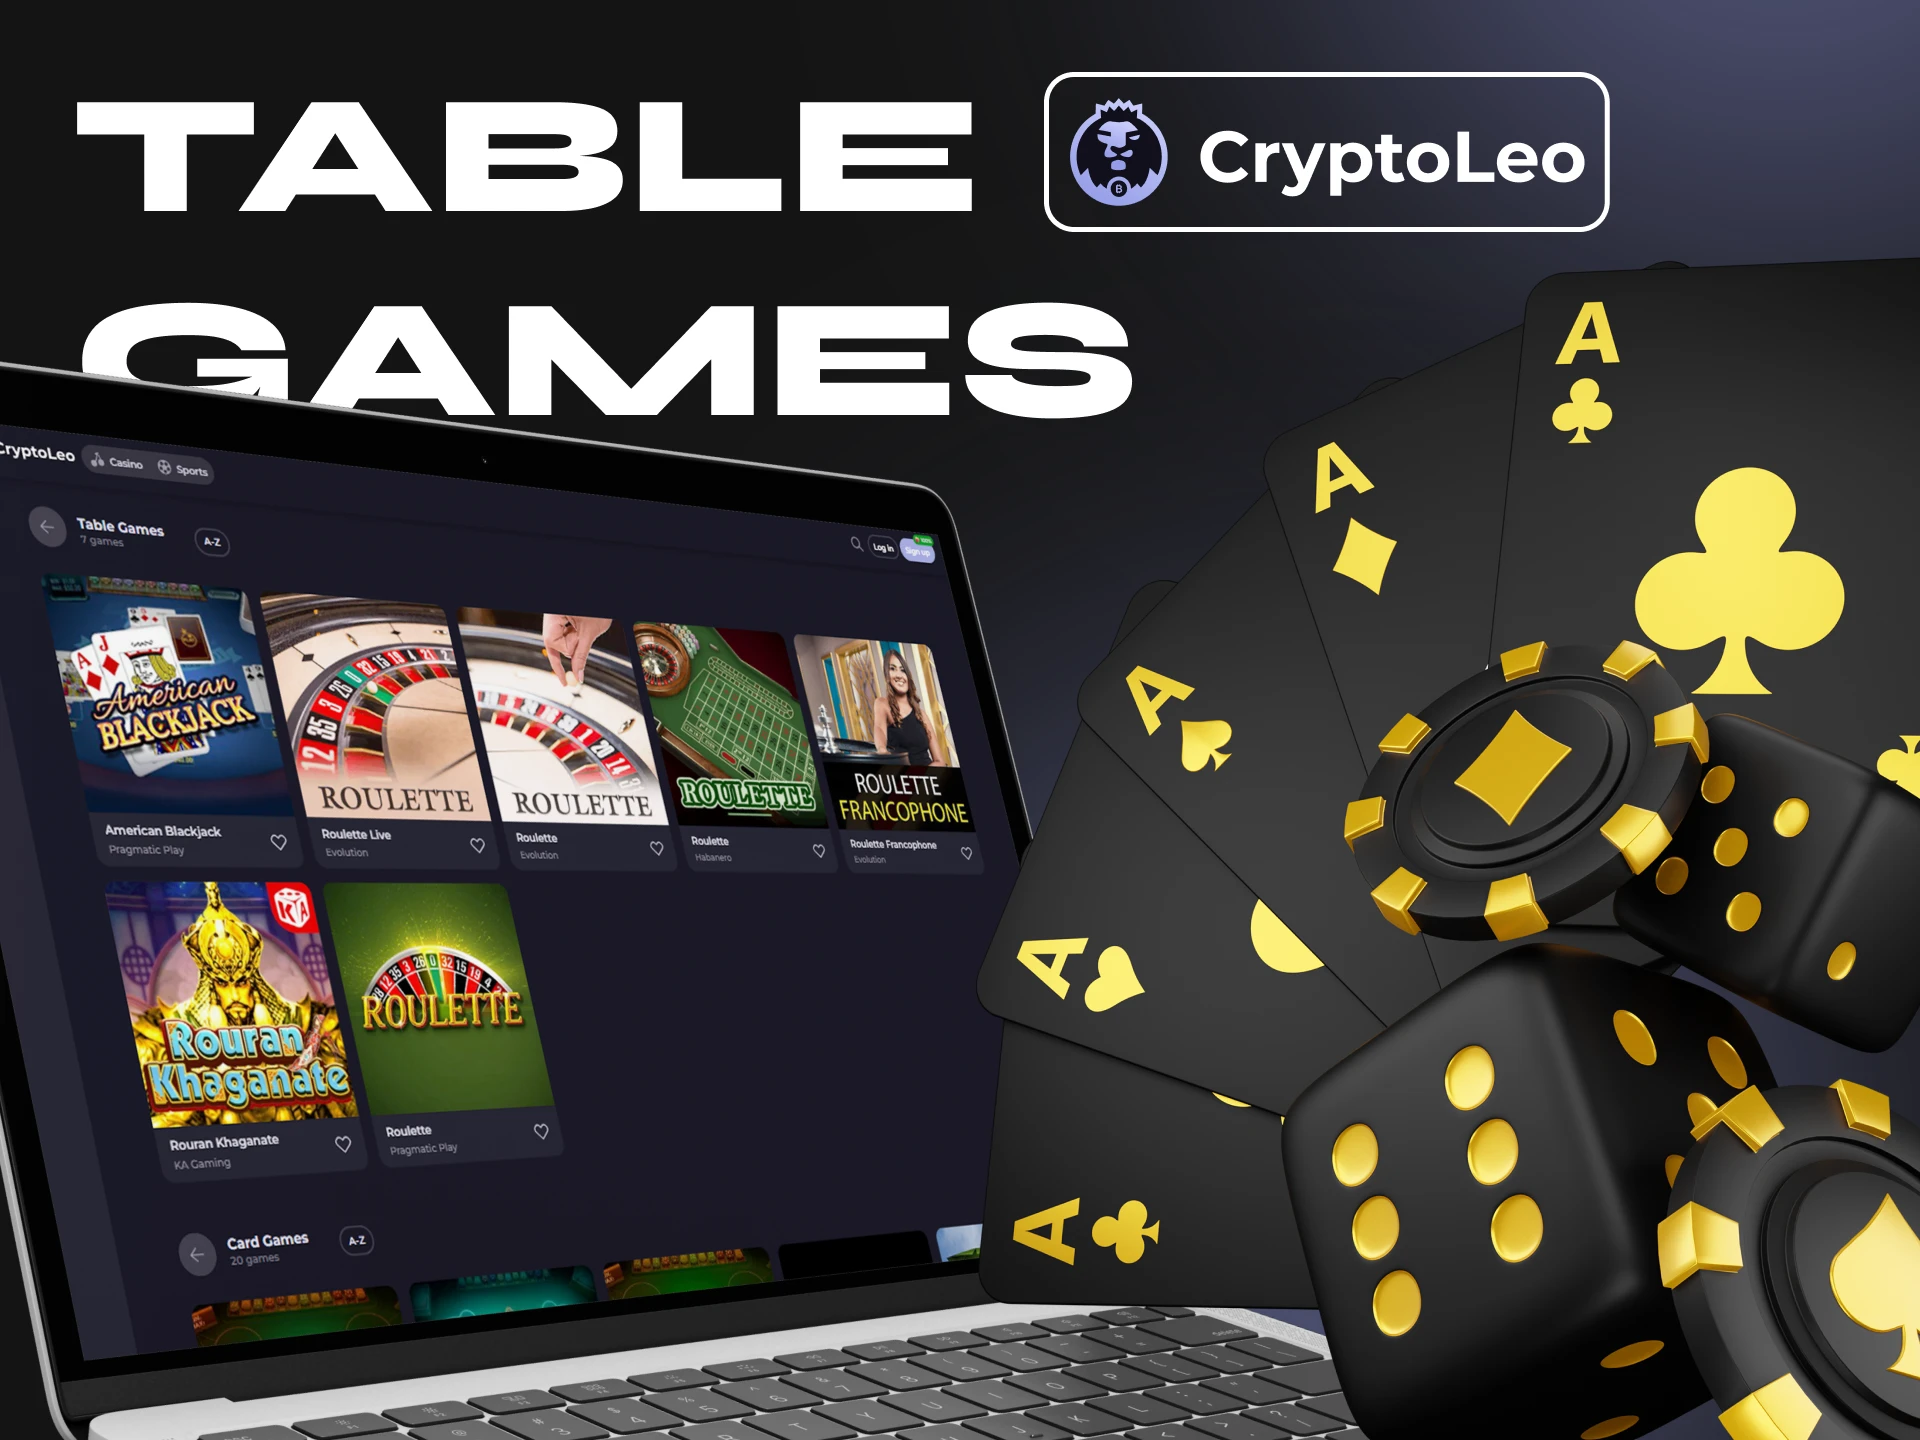 Play your favourite table games at Cryptoleo.